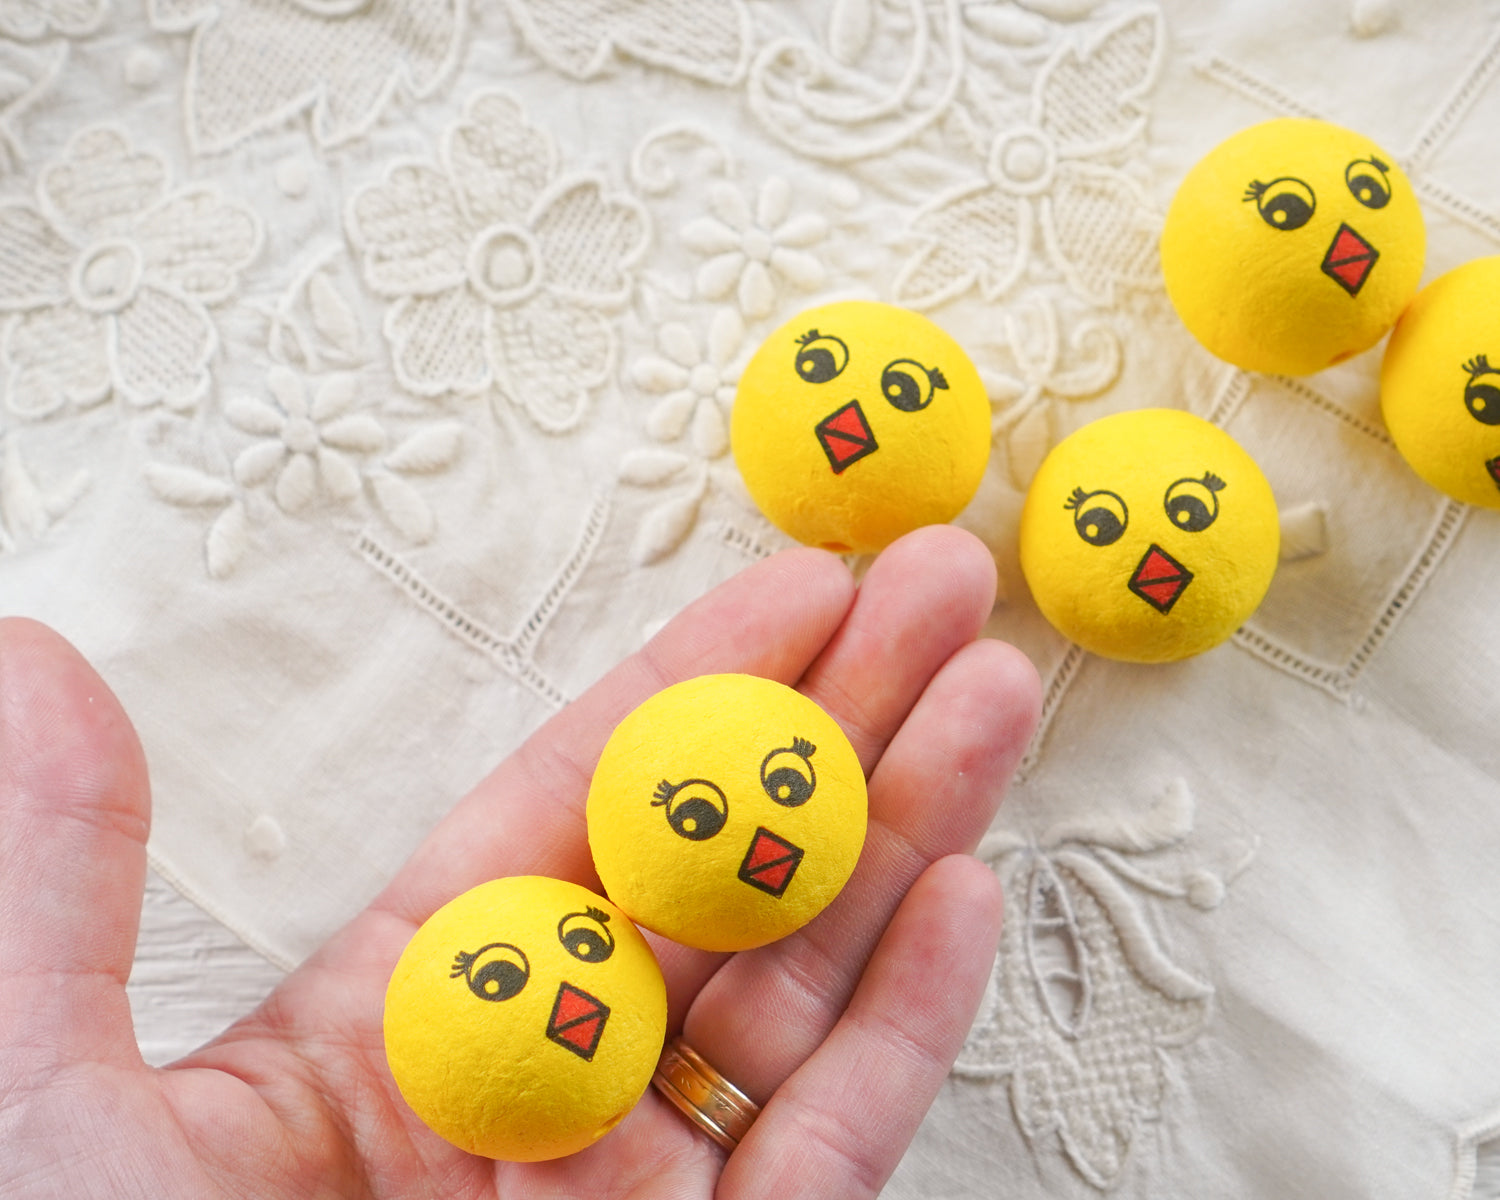 Spun Cotton Bird Craft Heads with Vintage-Style Chick Faces, 12 Pcs.